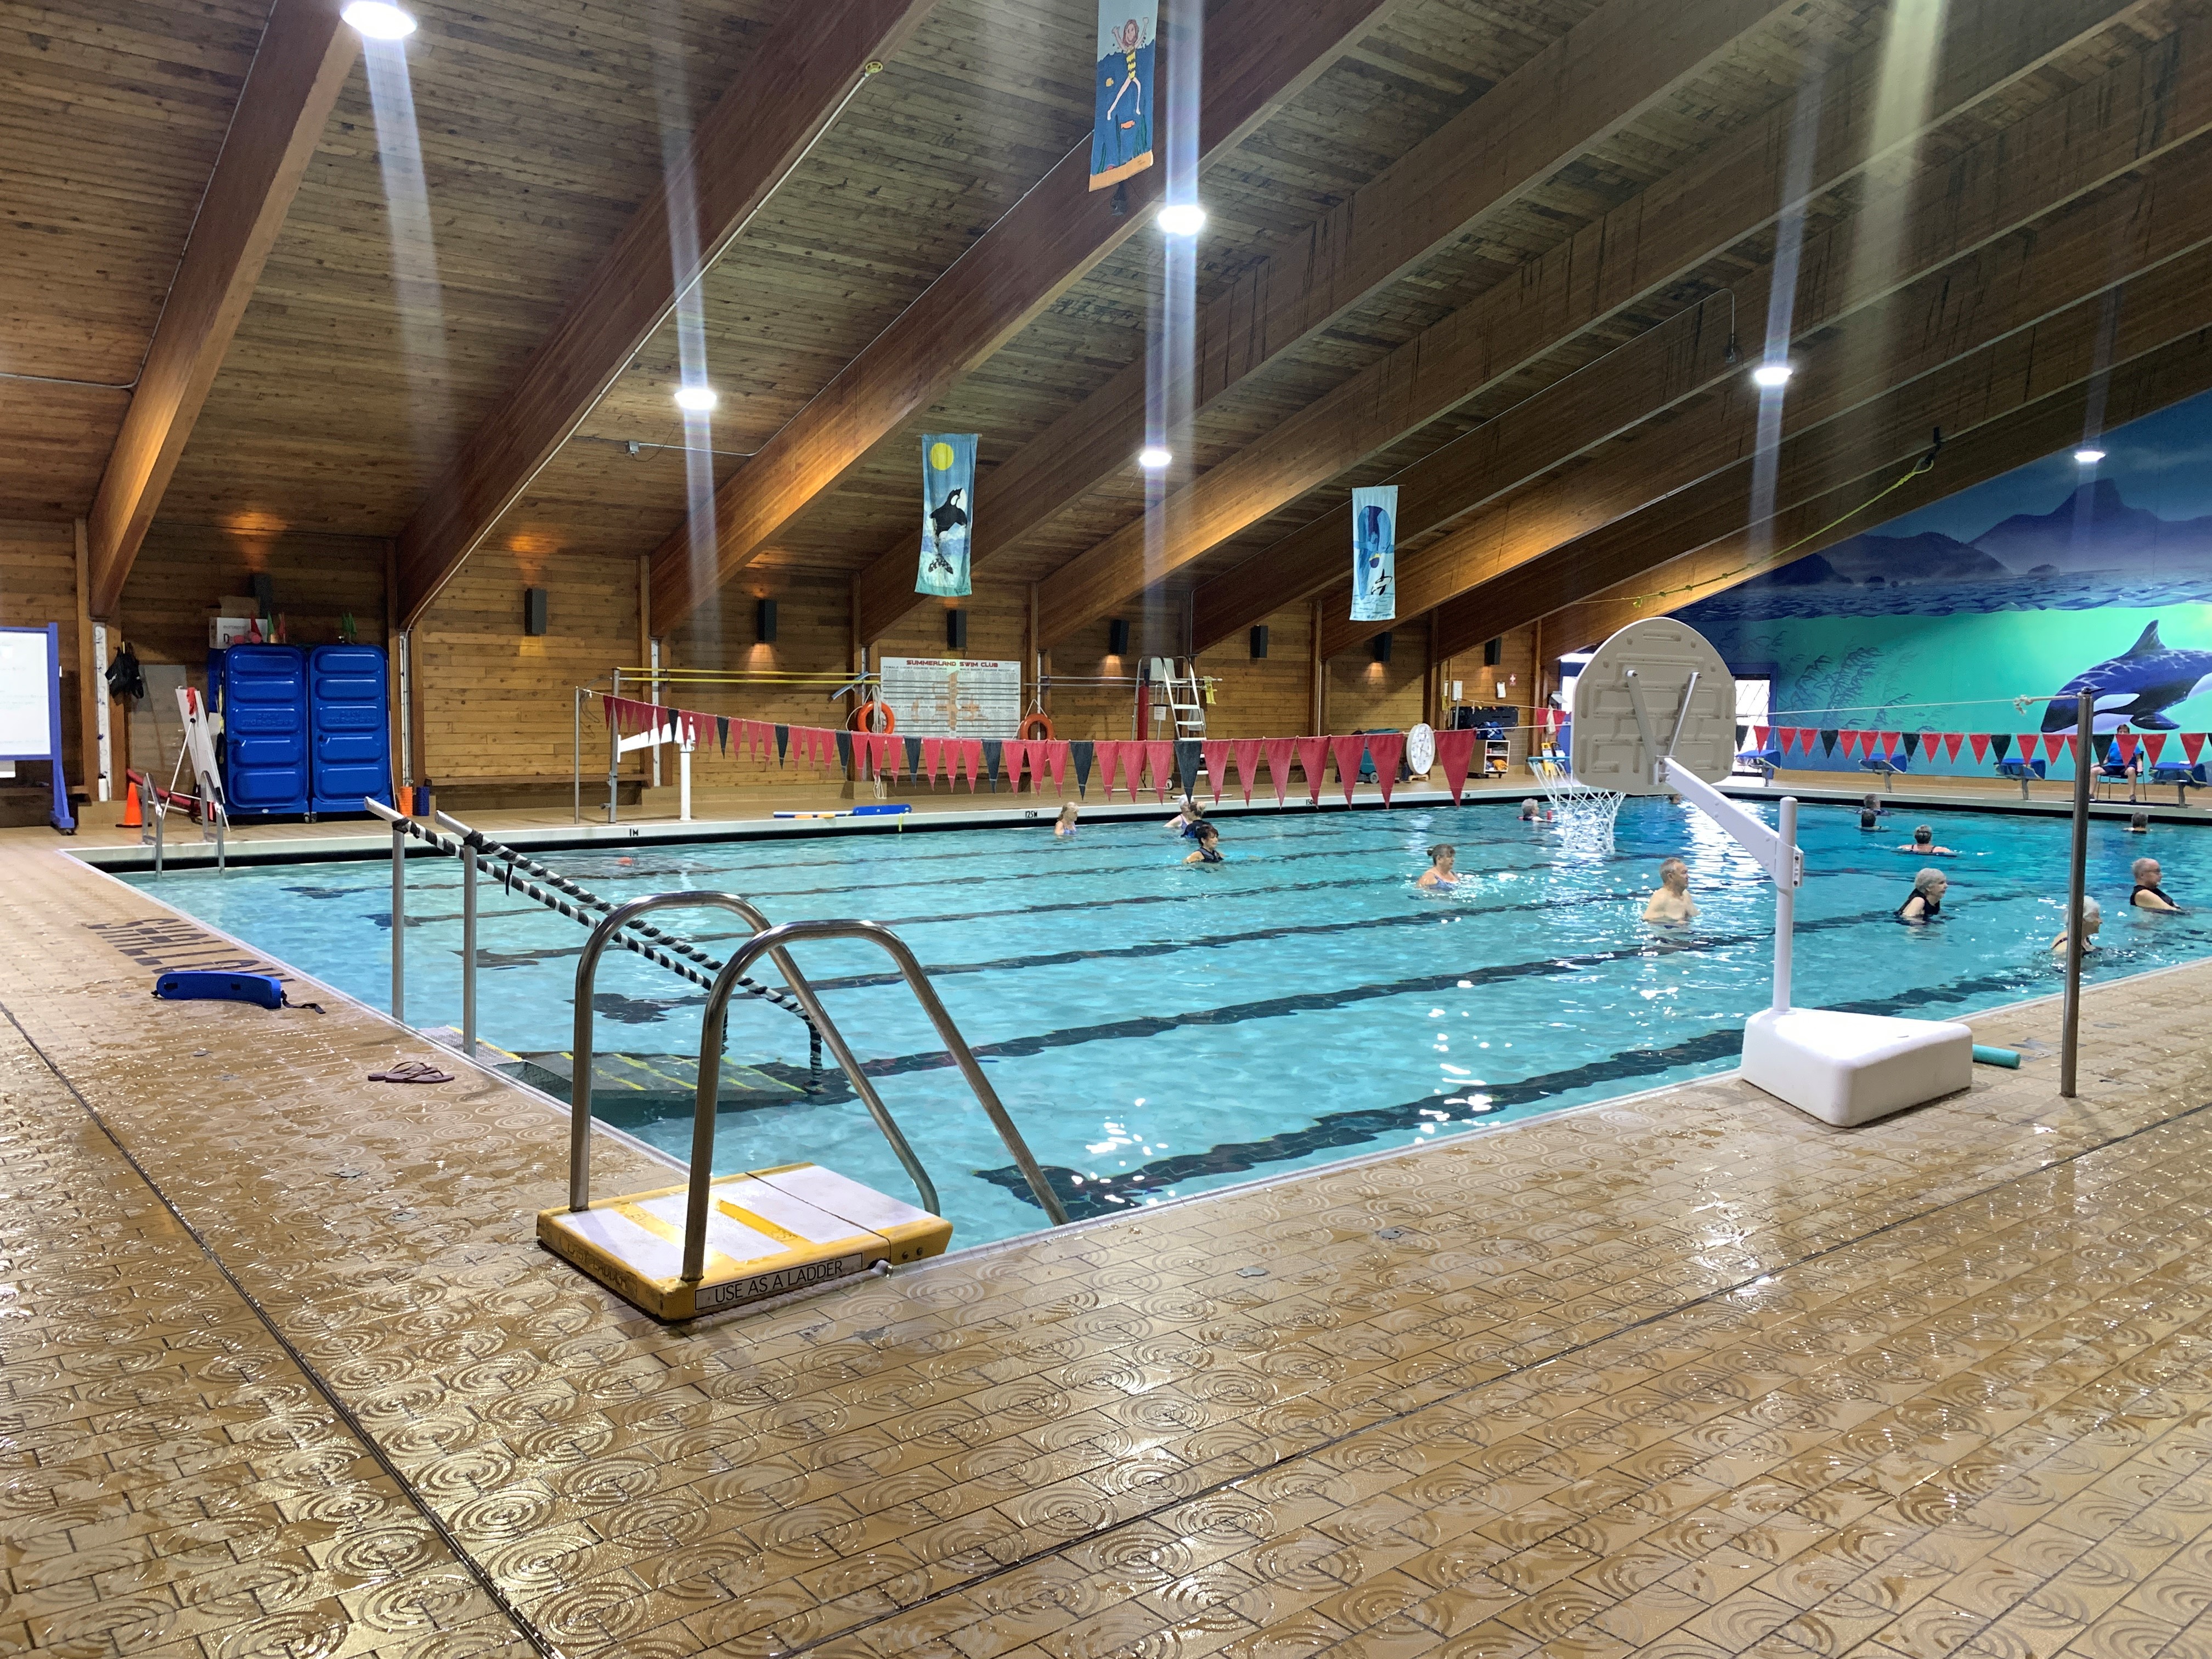 Summerland council votes to proceed with costly pool repairs